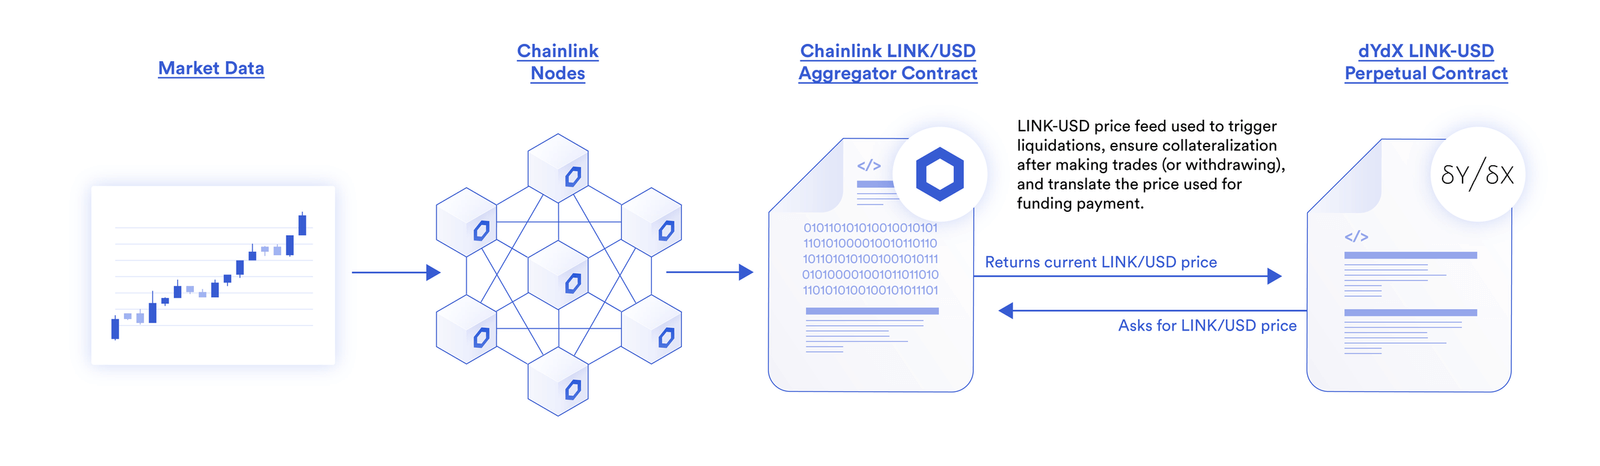 dYdX uses the LINK/USD Price Feed to power the on-chain LINK-USD Perpetual Contract